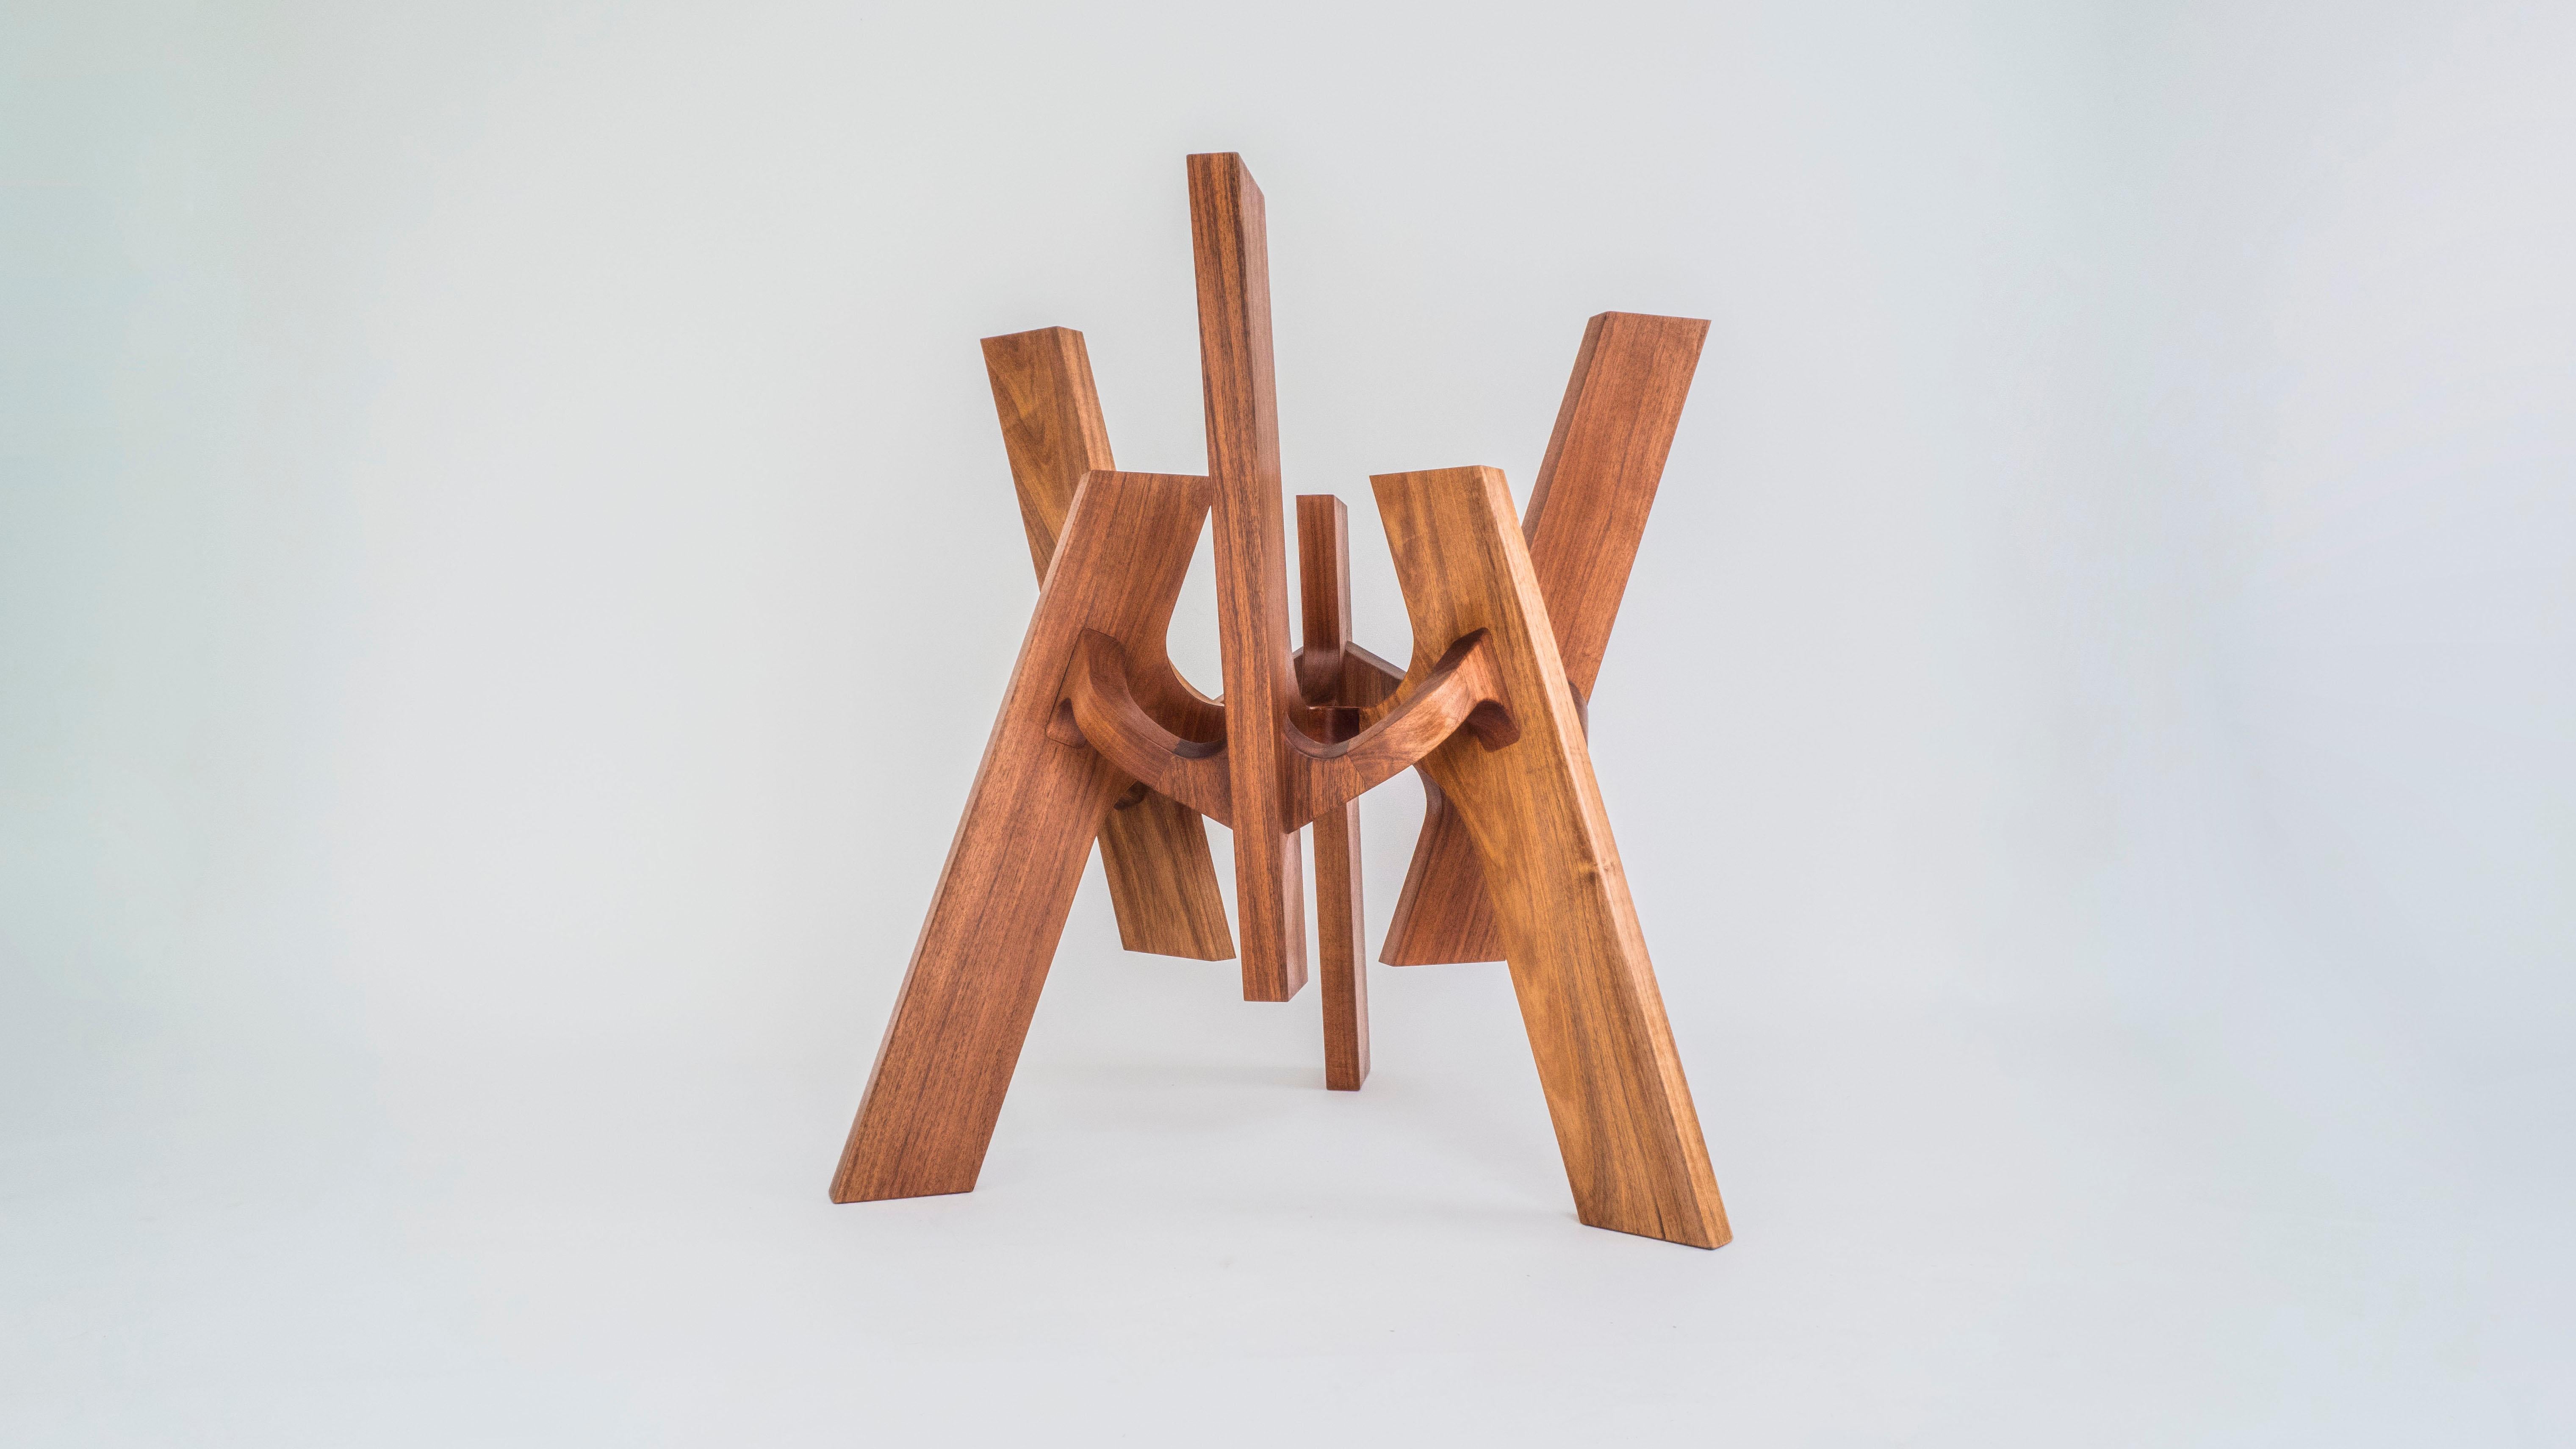 Poplar Astra, Geometric Sculptural Center Table Made of Solid Wood by Pedro Cerisola For Sale